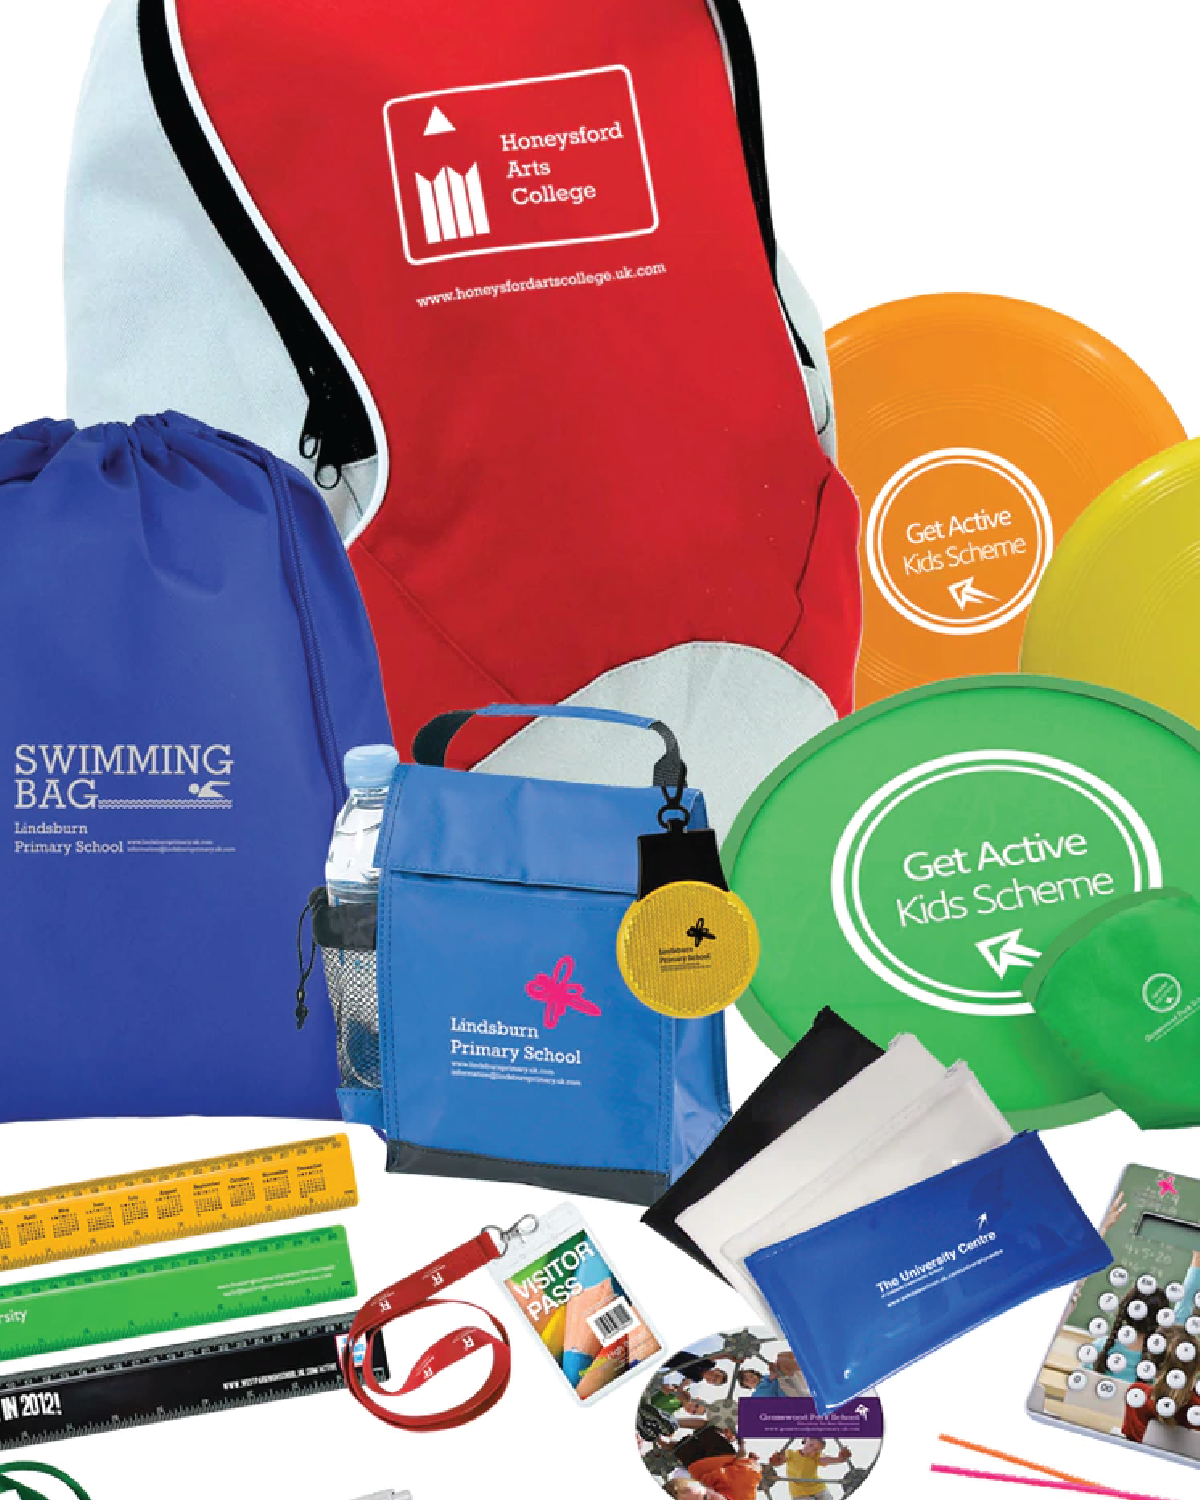 Promotional Products 